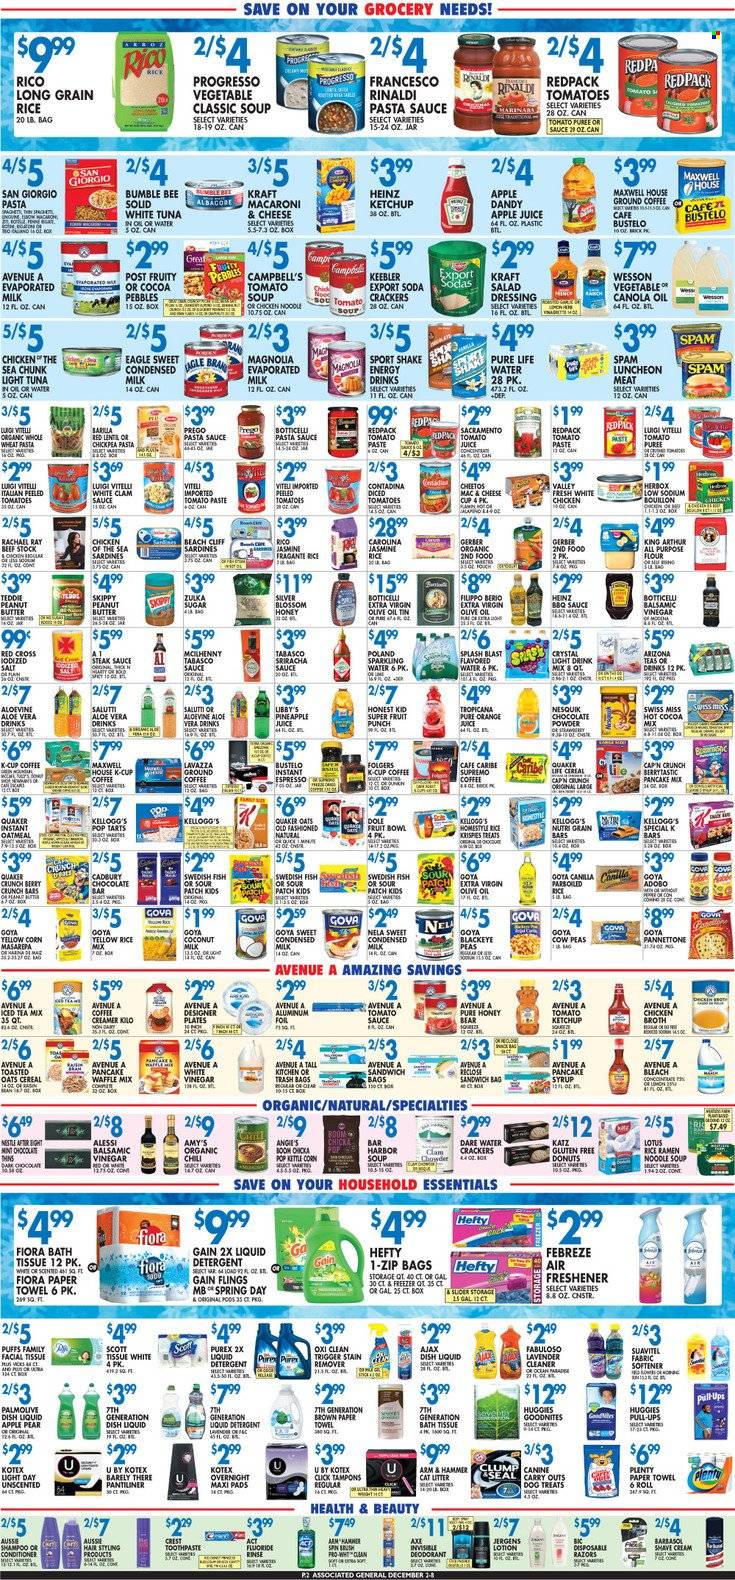 thumbnail - Associated Supermarkets Flyer - 12/02/2022 - 12/08/2022 - Sales products - puffs, peas, Dole, pineapple, pears, clams, sardines, tuna, Campbell's, ramen, tomato soup, pasta sauce, soup, Bumble Bee, noodles cup, Barilla, Quaker, noodles, Progresso, Kraft®, Spam, lunch meat, cheese cup, Nesquik, Swiss Miss, evaporated milk, condensed milk, shake, Blossom, creamer, Nestlé, snack, crackers, Kellogg's, dark chocolate, After Eight, Cadbury, Pop-Tarts, Keebler, sour patch, chocolate bar, Gerber, kettle corn, Cheetos, Thins, all purpose flour, ARM & HAMMER, bouillon, flour, sugar, tabasco, chicken broth, oatmeal, broth, coconut milk, tomato paste, tomato sauce, Heinz, light tuna, tomato puree, Chicken of the Sea, Goya, diced tomatoes, cereals, Rice Krispies, Nutri-Grain, toasted oats, jasmine rice, long grain rice, adobo sauce, BBQ sauce, salad dressing, sriracha, steak sauce, ketchup, dressing, balsamic vinegar, canola oil, extra virgin olive oil, vinegar, olive oil, honey, peanut butter, pancake syrup, syrup, apple juice, pineapple juice, orange juice, juice, energy drink, ice tea, AriZona, flavored water, soda, hot cocoa, Maxwell House, Folgers, ground coffee, coffee capsules, K-Cups, Lavazza, sake, punch, steak, Huggies, bath tissue, Scott, Plenty, paper towels, detergent, Febreze, Gain, cleaner, bleach, stain remover, Ajax, Fabuloso, fabric softener, liquid detergent, Purex, dishwashing liquid, shampoo, Palmolive, toothpaste, Crest, Kotex, tampons, toner, Aussie, conditioner, body lotion, Jergens, anti-perspirant, deodorant, Axe, Barbasol, shave cream, disposable razor, Lotus, Hefty, trash bags, cat litter, bowl. Page 2.